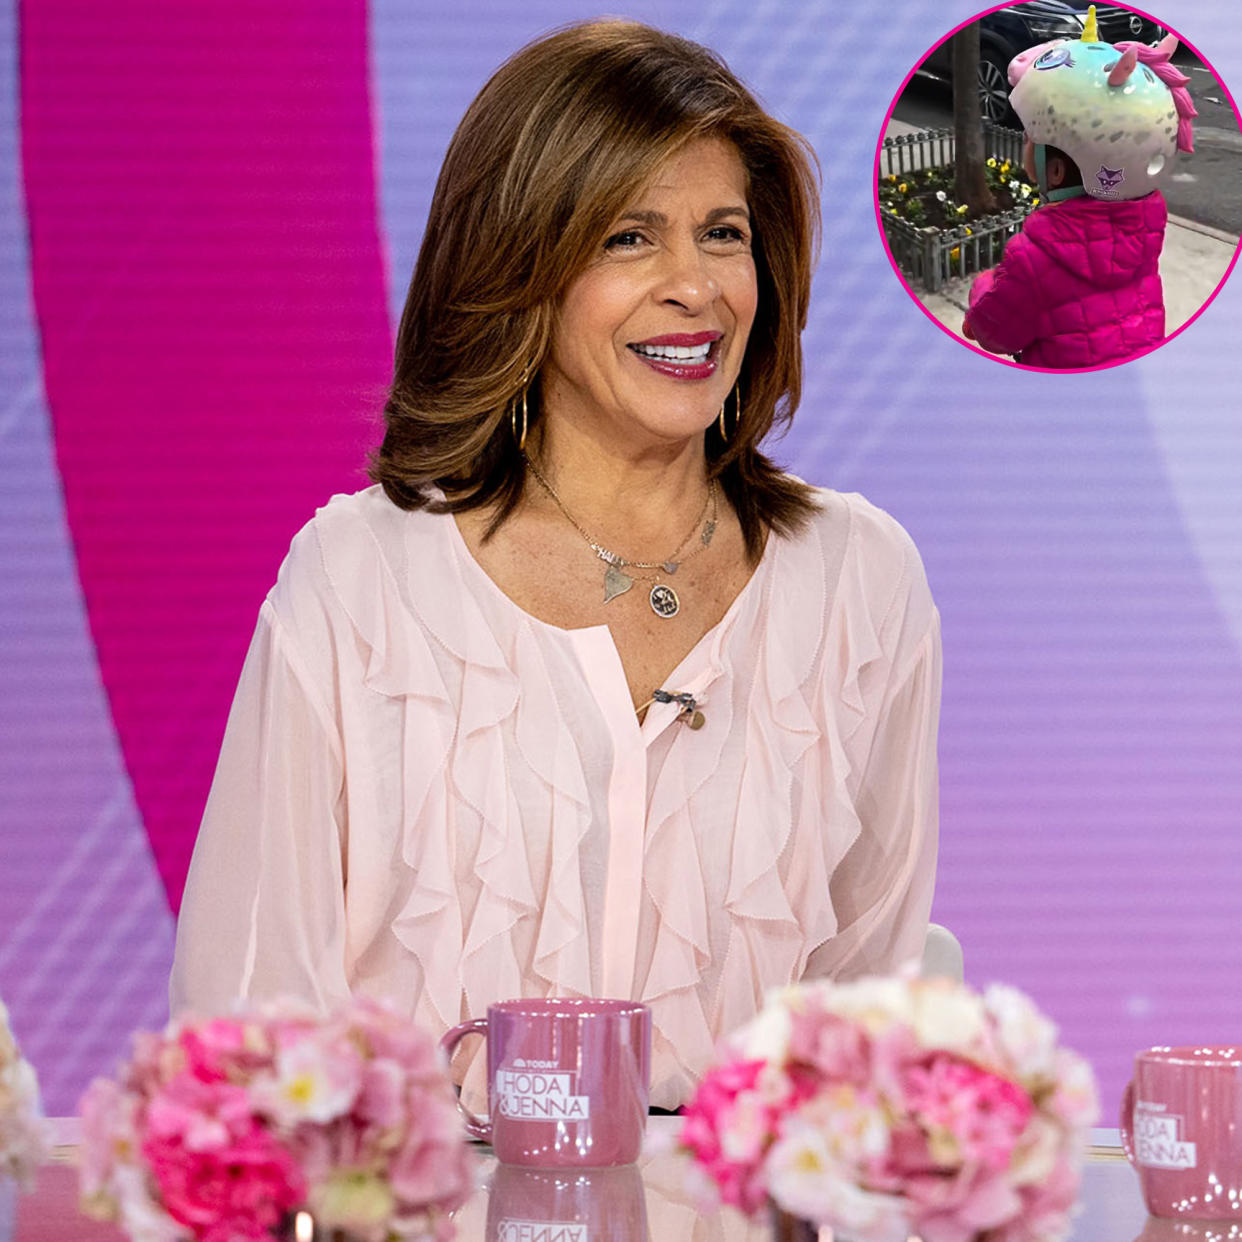 Hoda Kotb Returns to 'Today With Hoda and Jenna' as She Shares Adorable Video of Daughter Hope